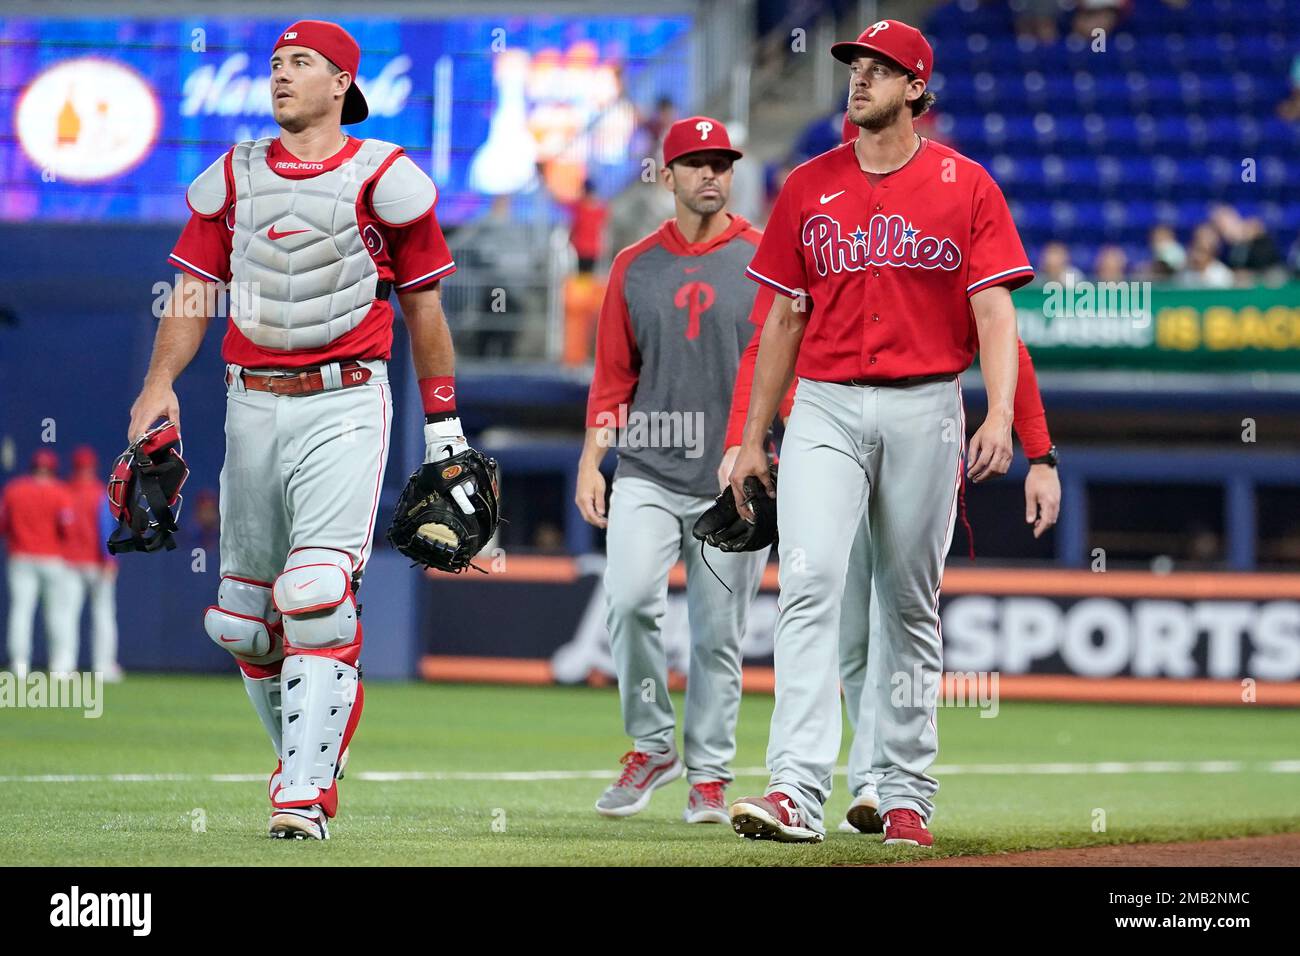 Philadelphia Phillies catcher J.T. Realmuto, left, and starting pitcher Aaron  Nola, right, walk to the dugout before a baseball game against the Miami  Marlins, Sunday, July 17, 2022, in Miami. (AP Photo/Lynne